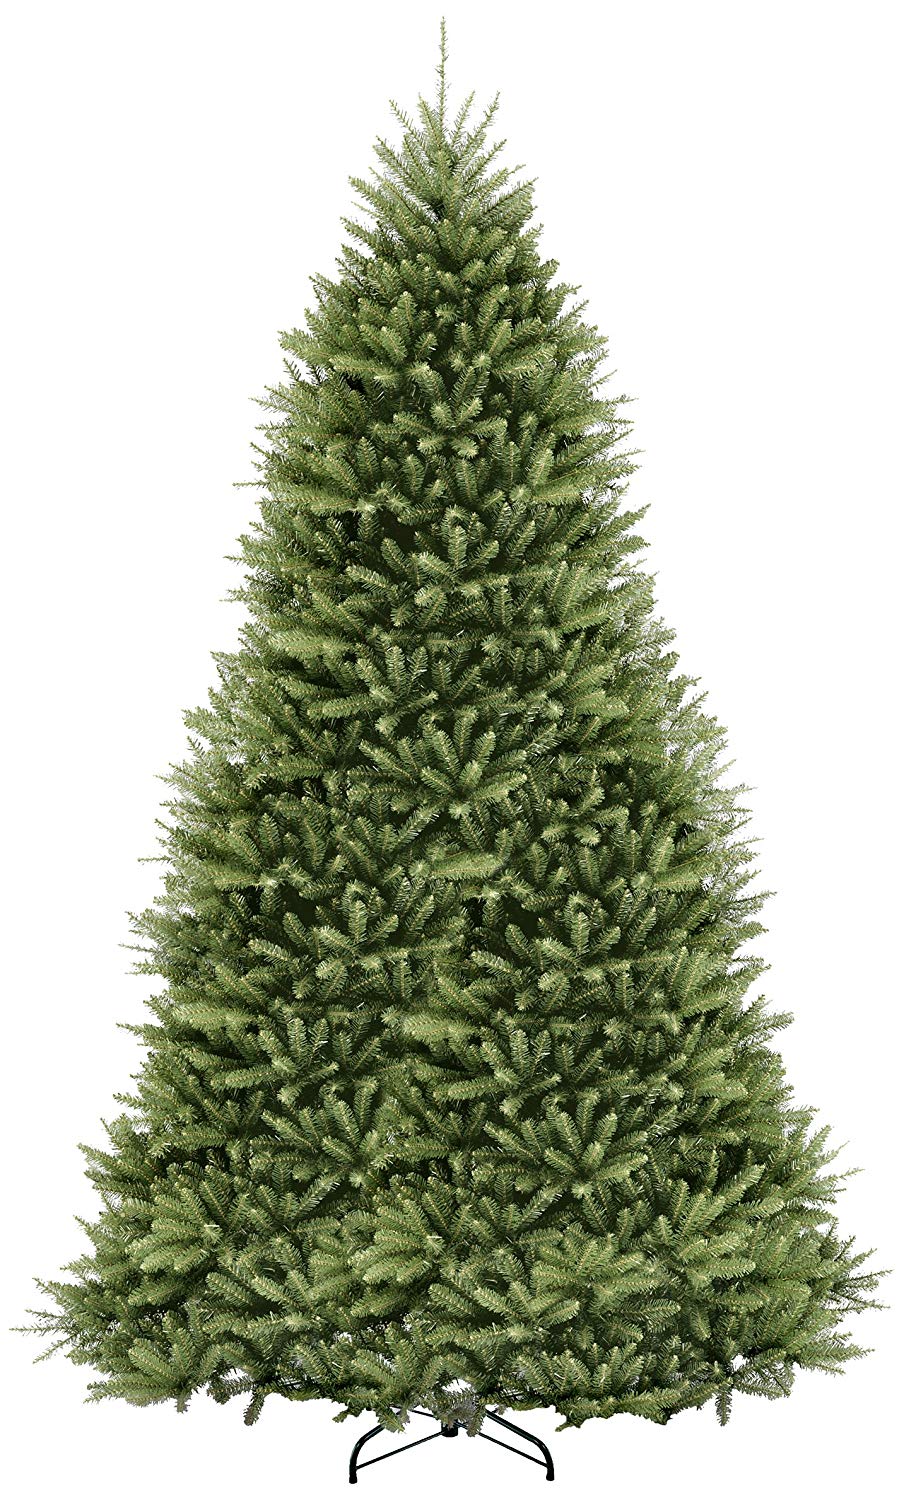 The BEST Artificial Christmas Trees | National Tree 12 Foot Dunhill Fir Tree